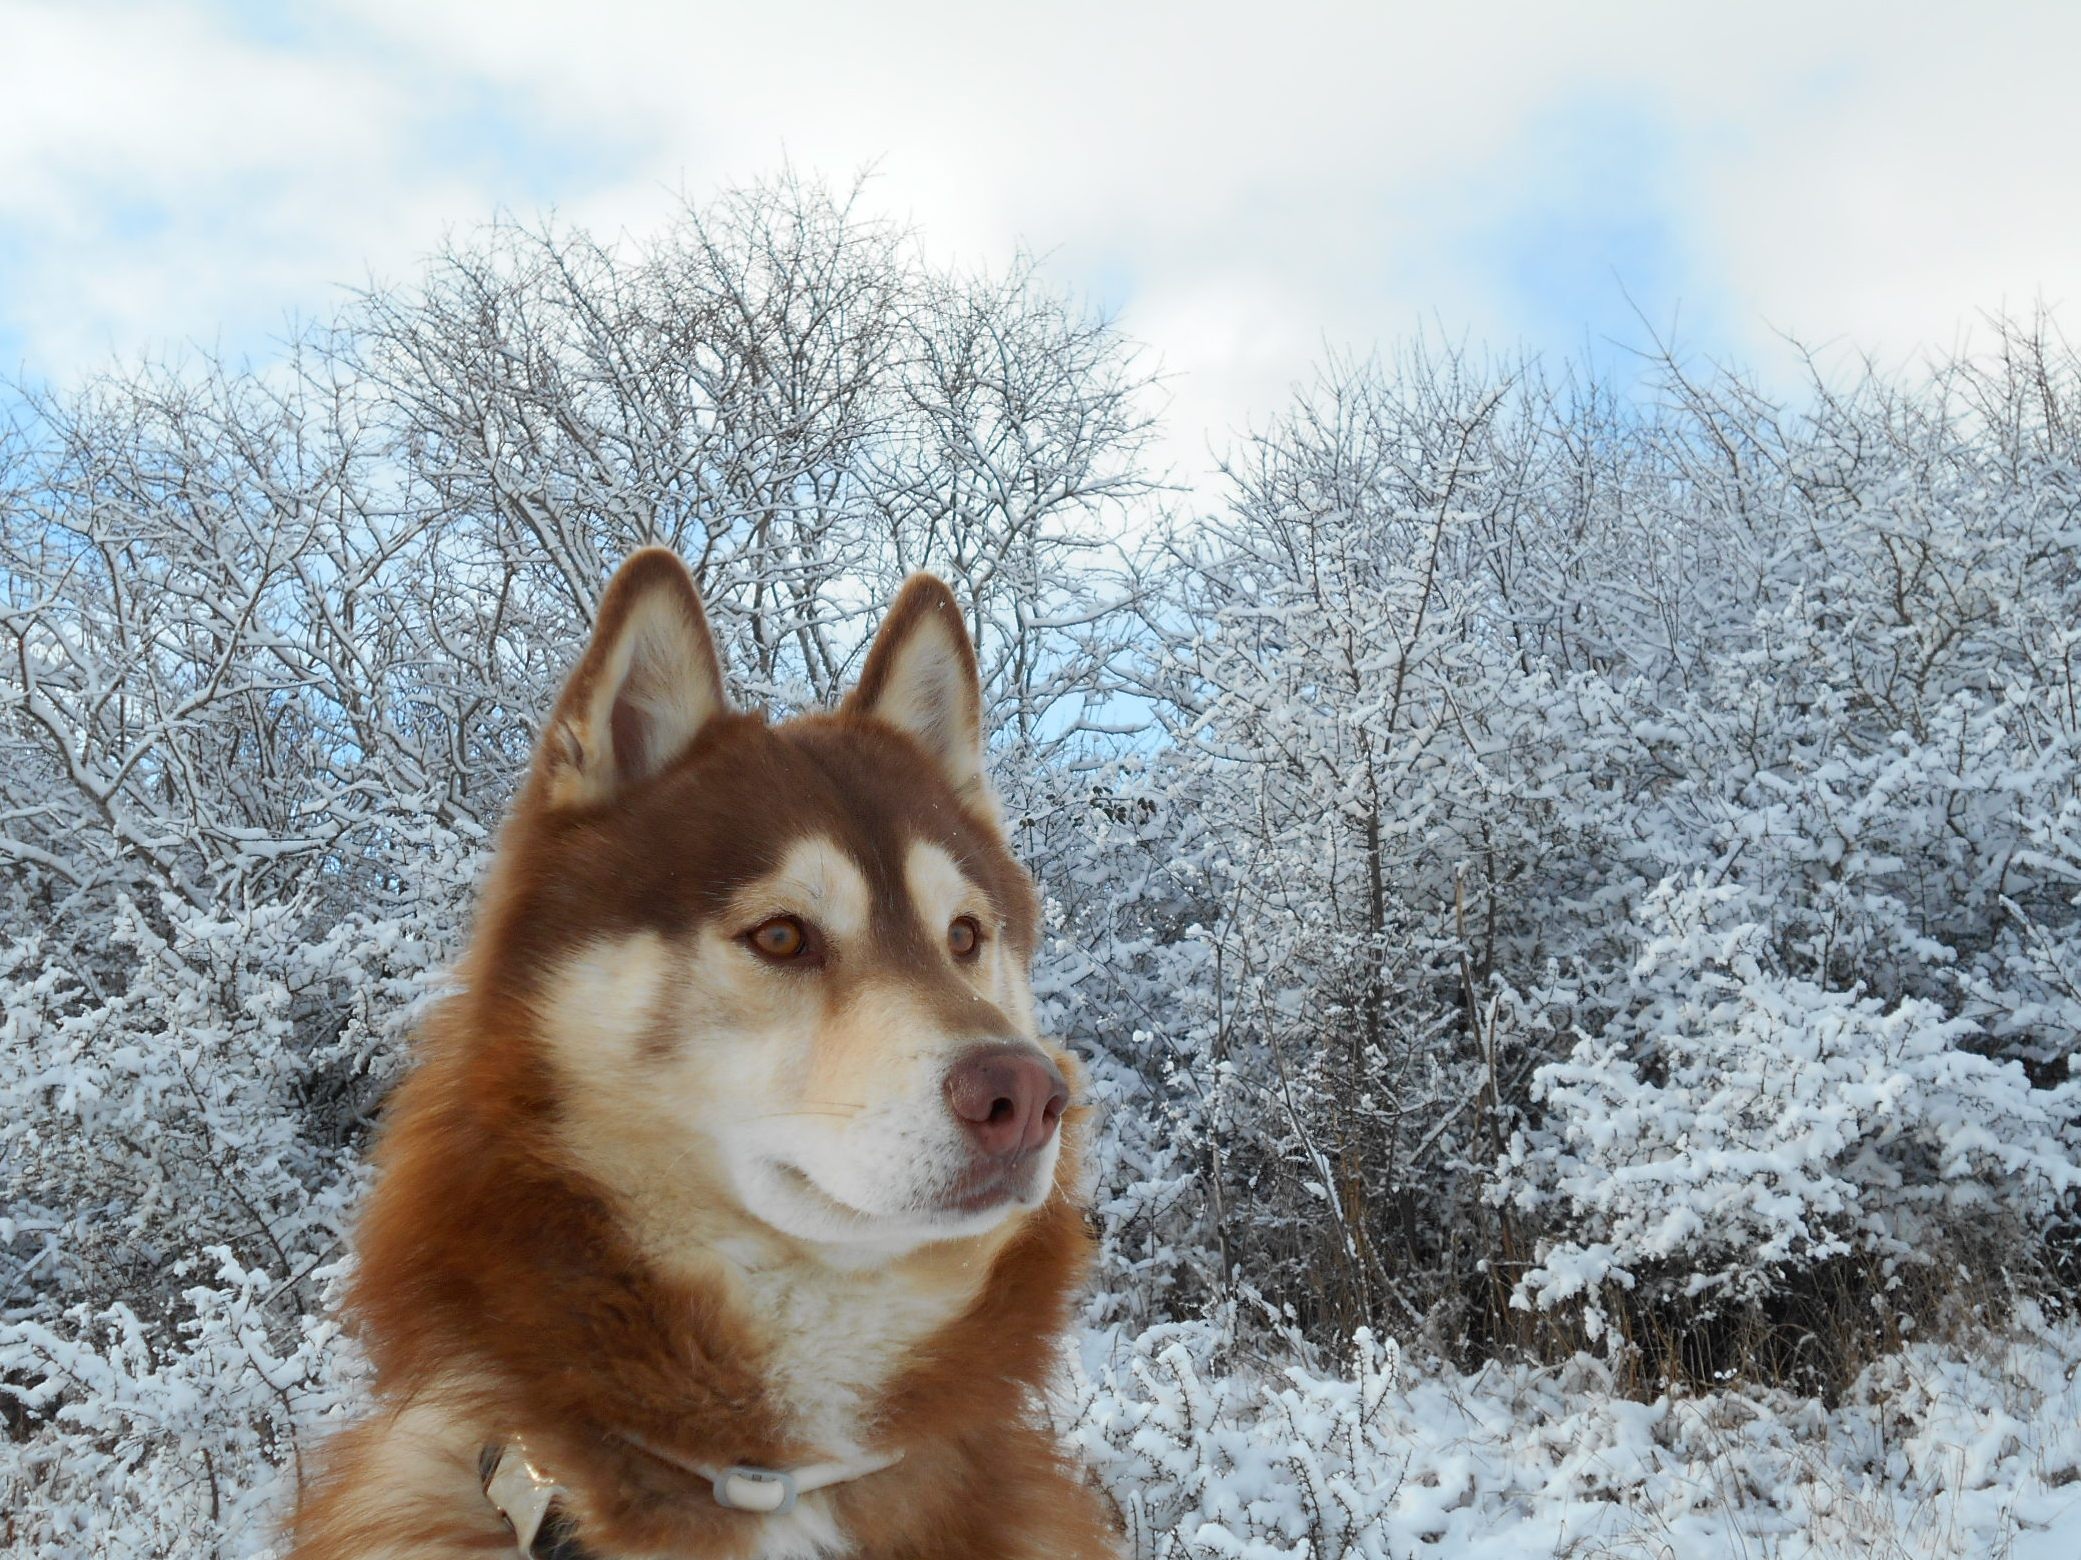 Siberian Husky in the winter snow by MilanoNegro